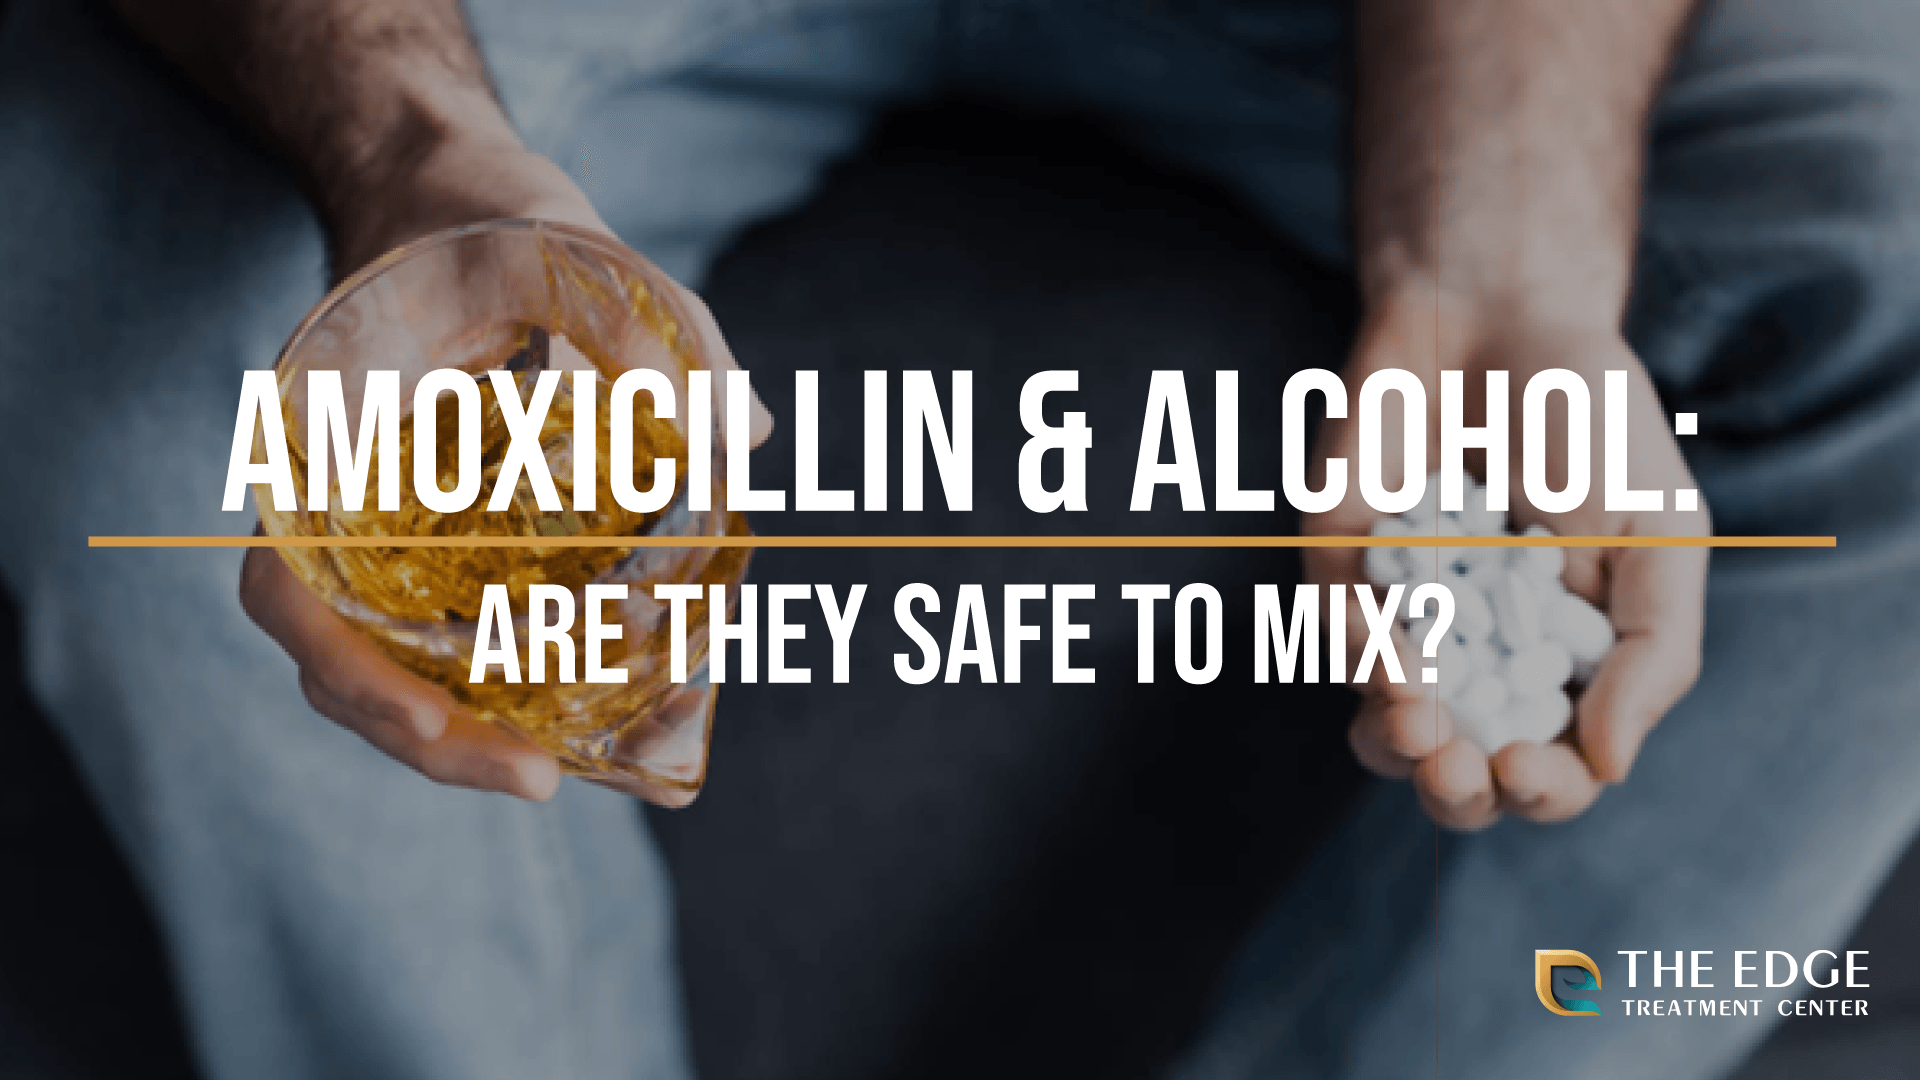 Is Mixing Amoxicillin and Alcohol Safe?